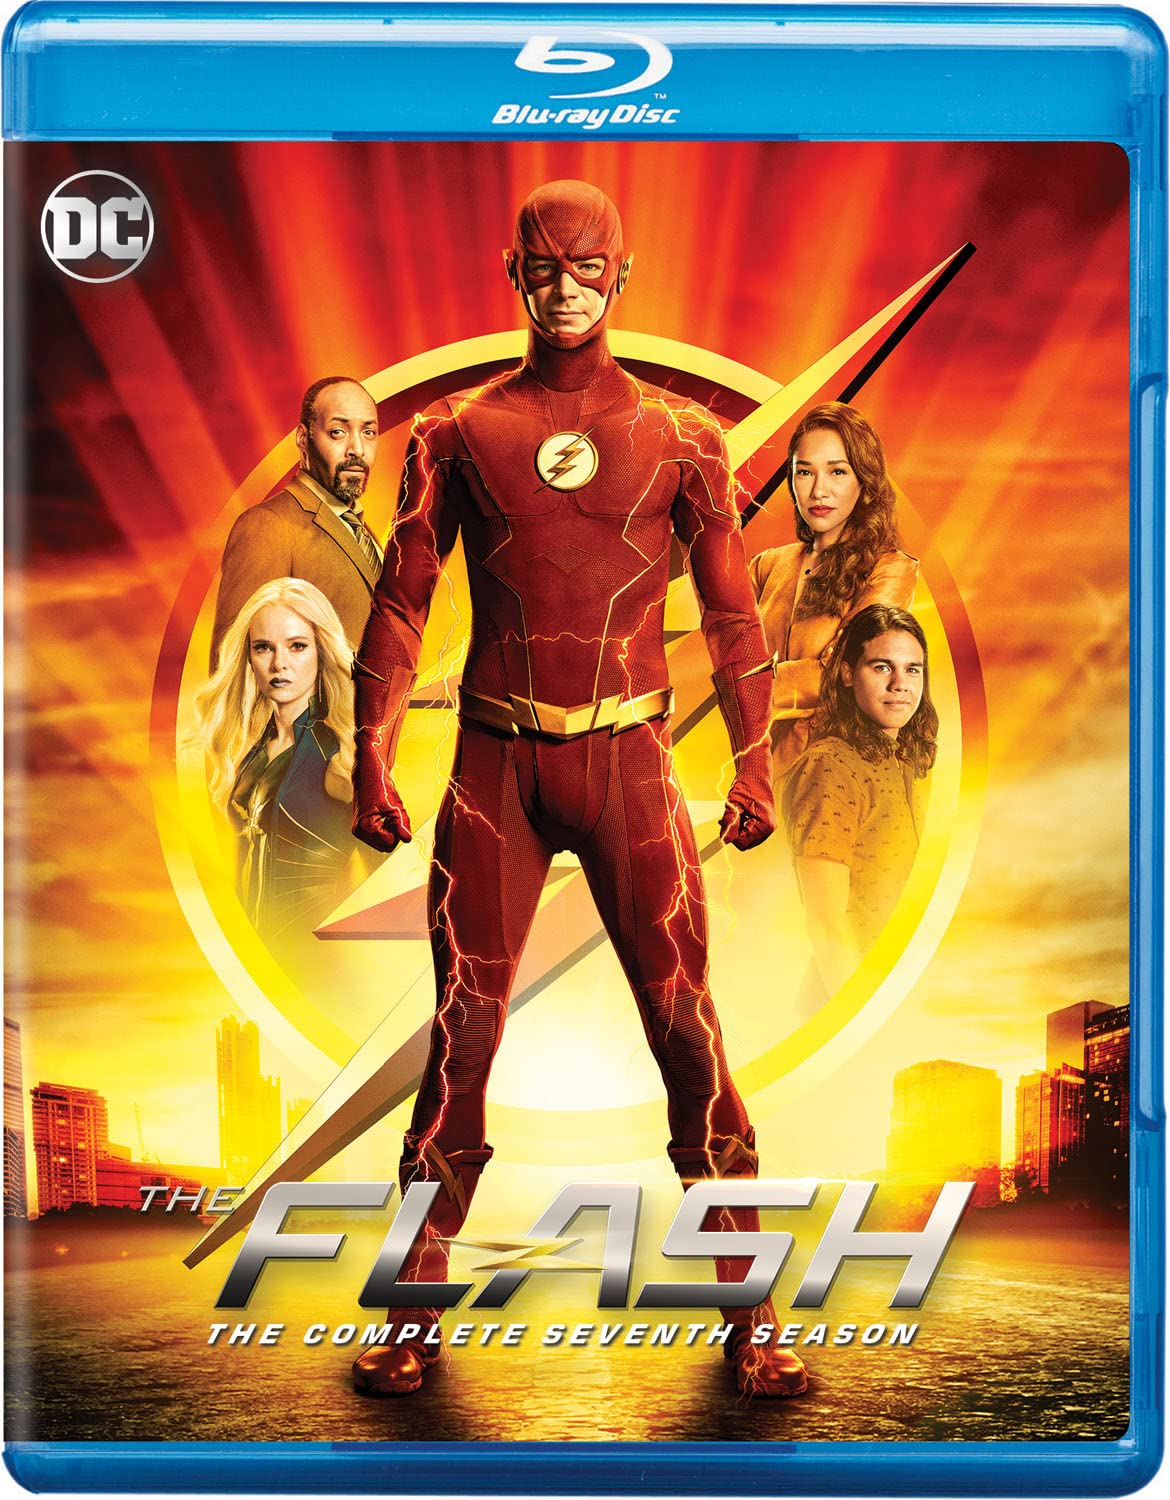 The Flash: The Complete Seventh Season (Box Set) - Blu-ray [ 2021 ]  - Drama Television On Blu-ray - TV Shows On GRUV